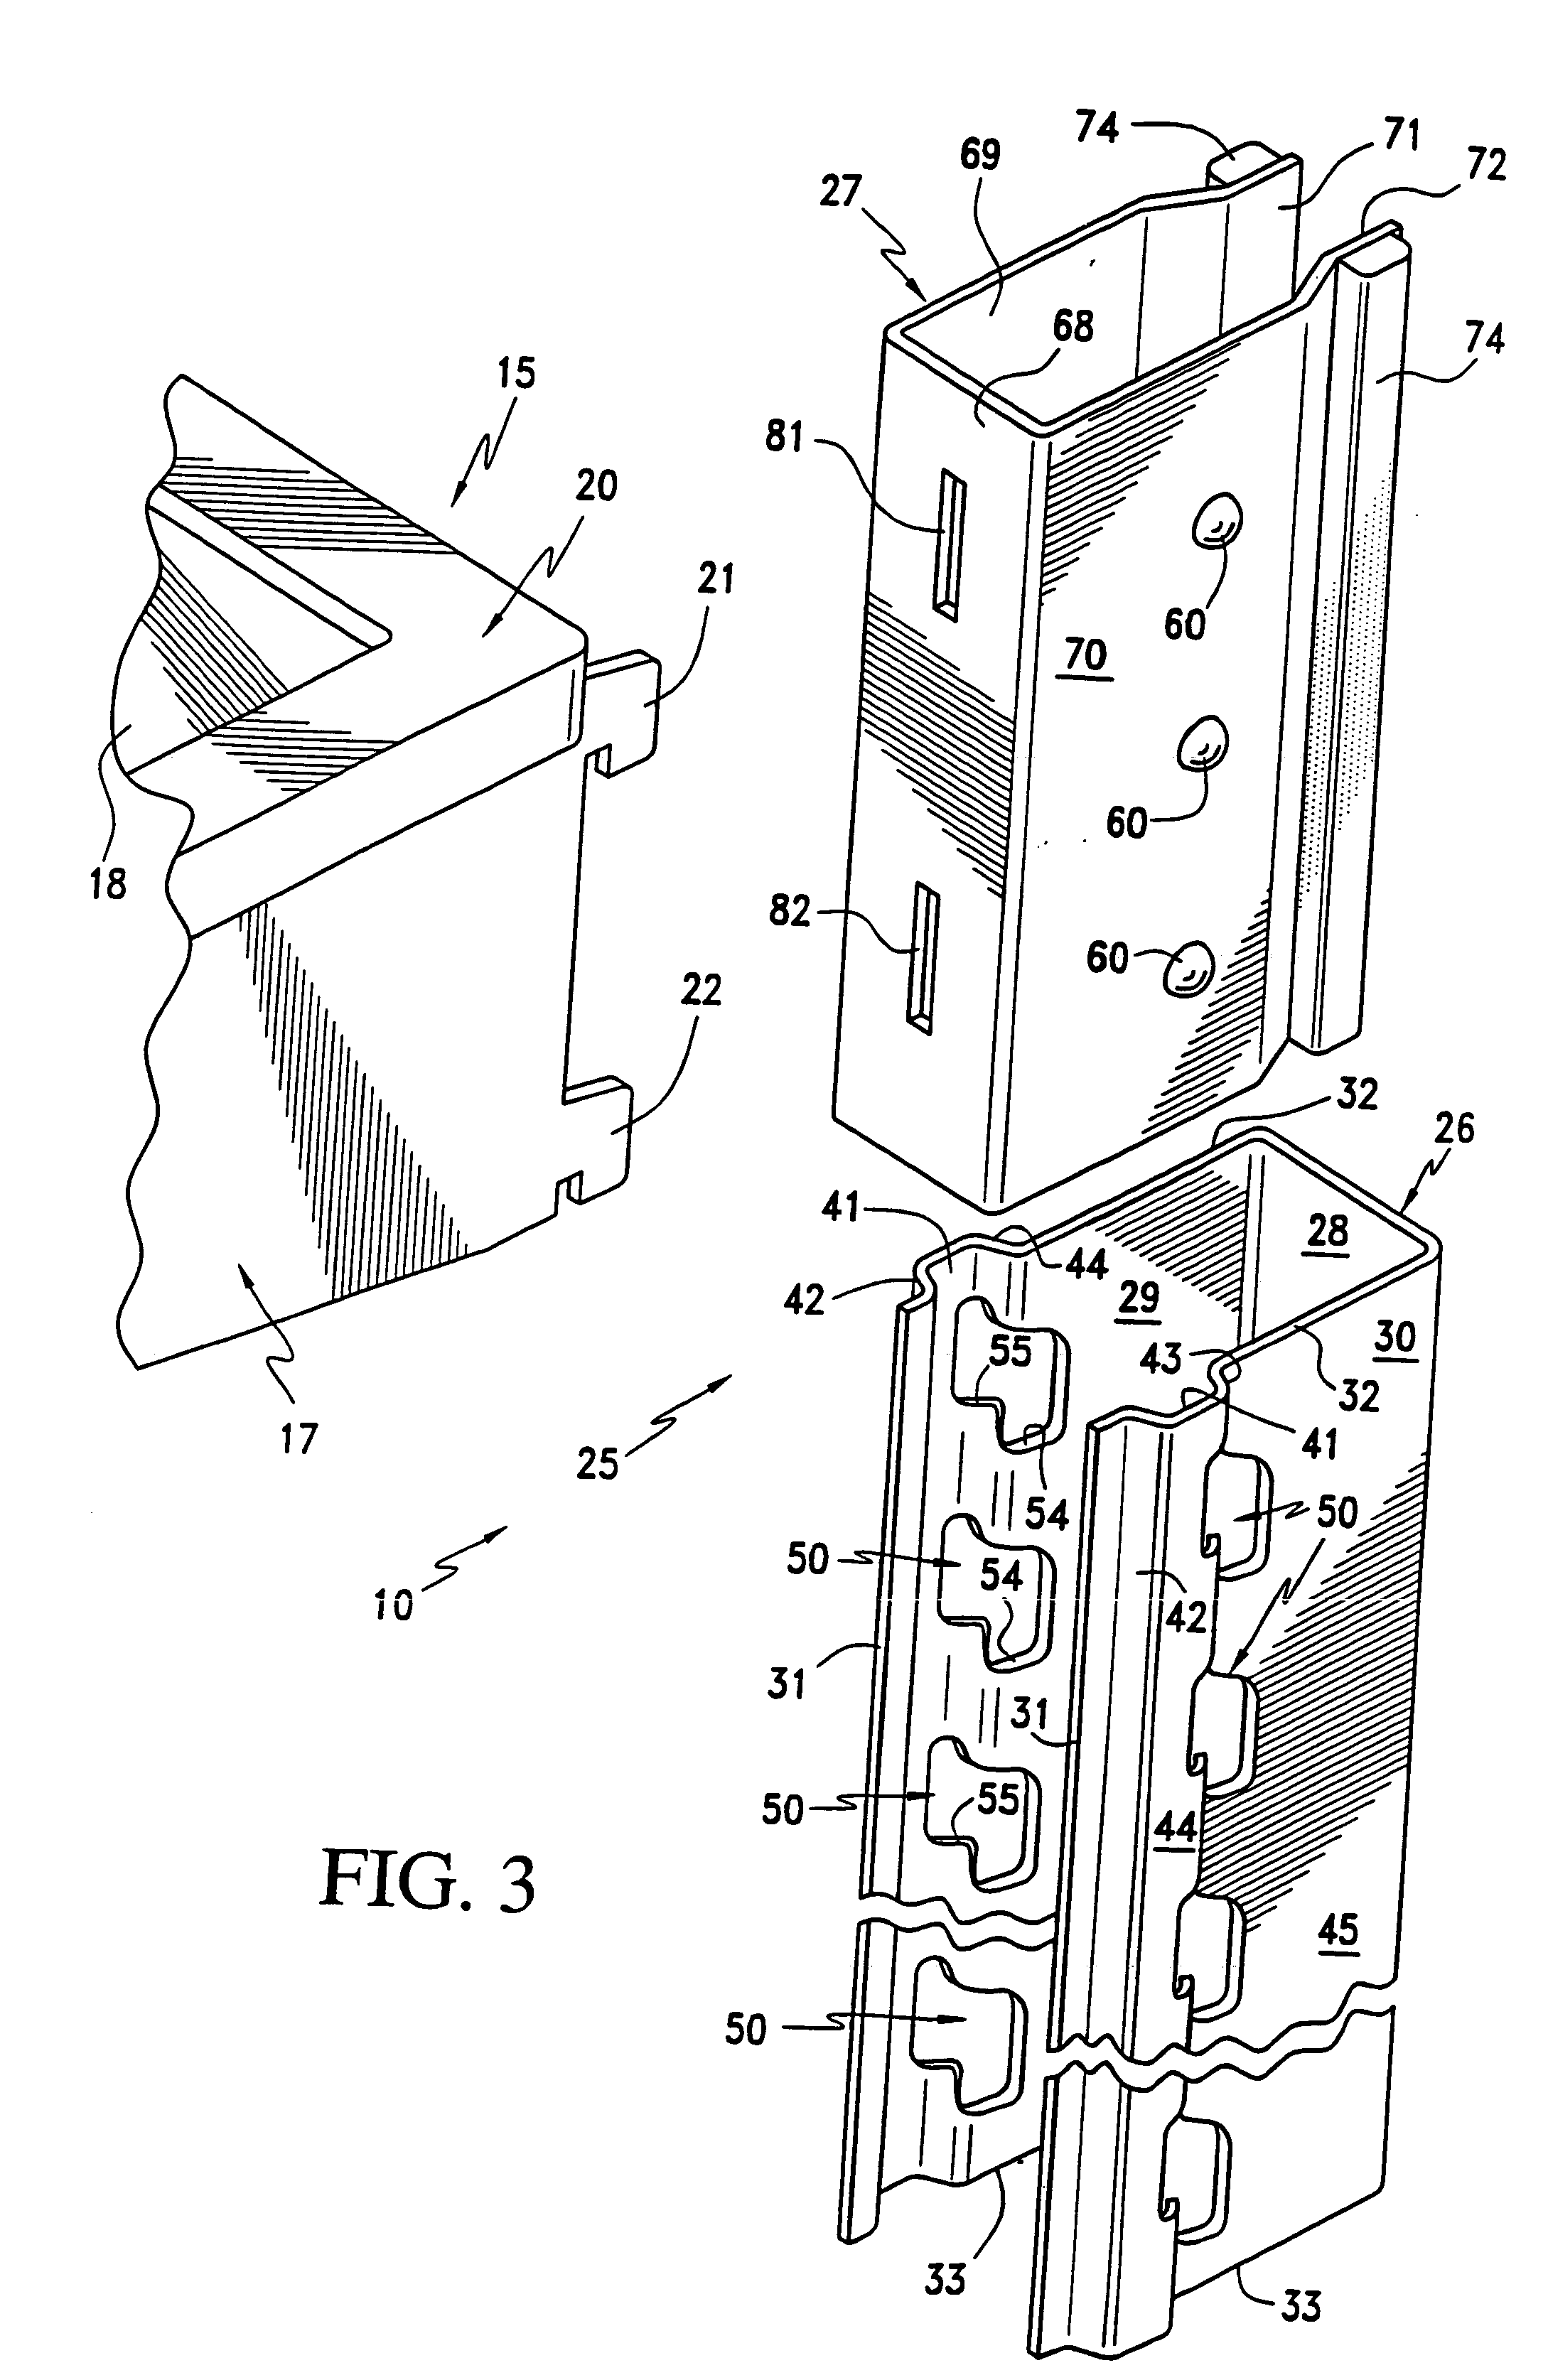 Vertically adjustable shelves and refrigerator compartment housing the same